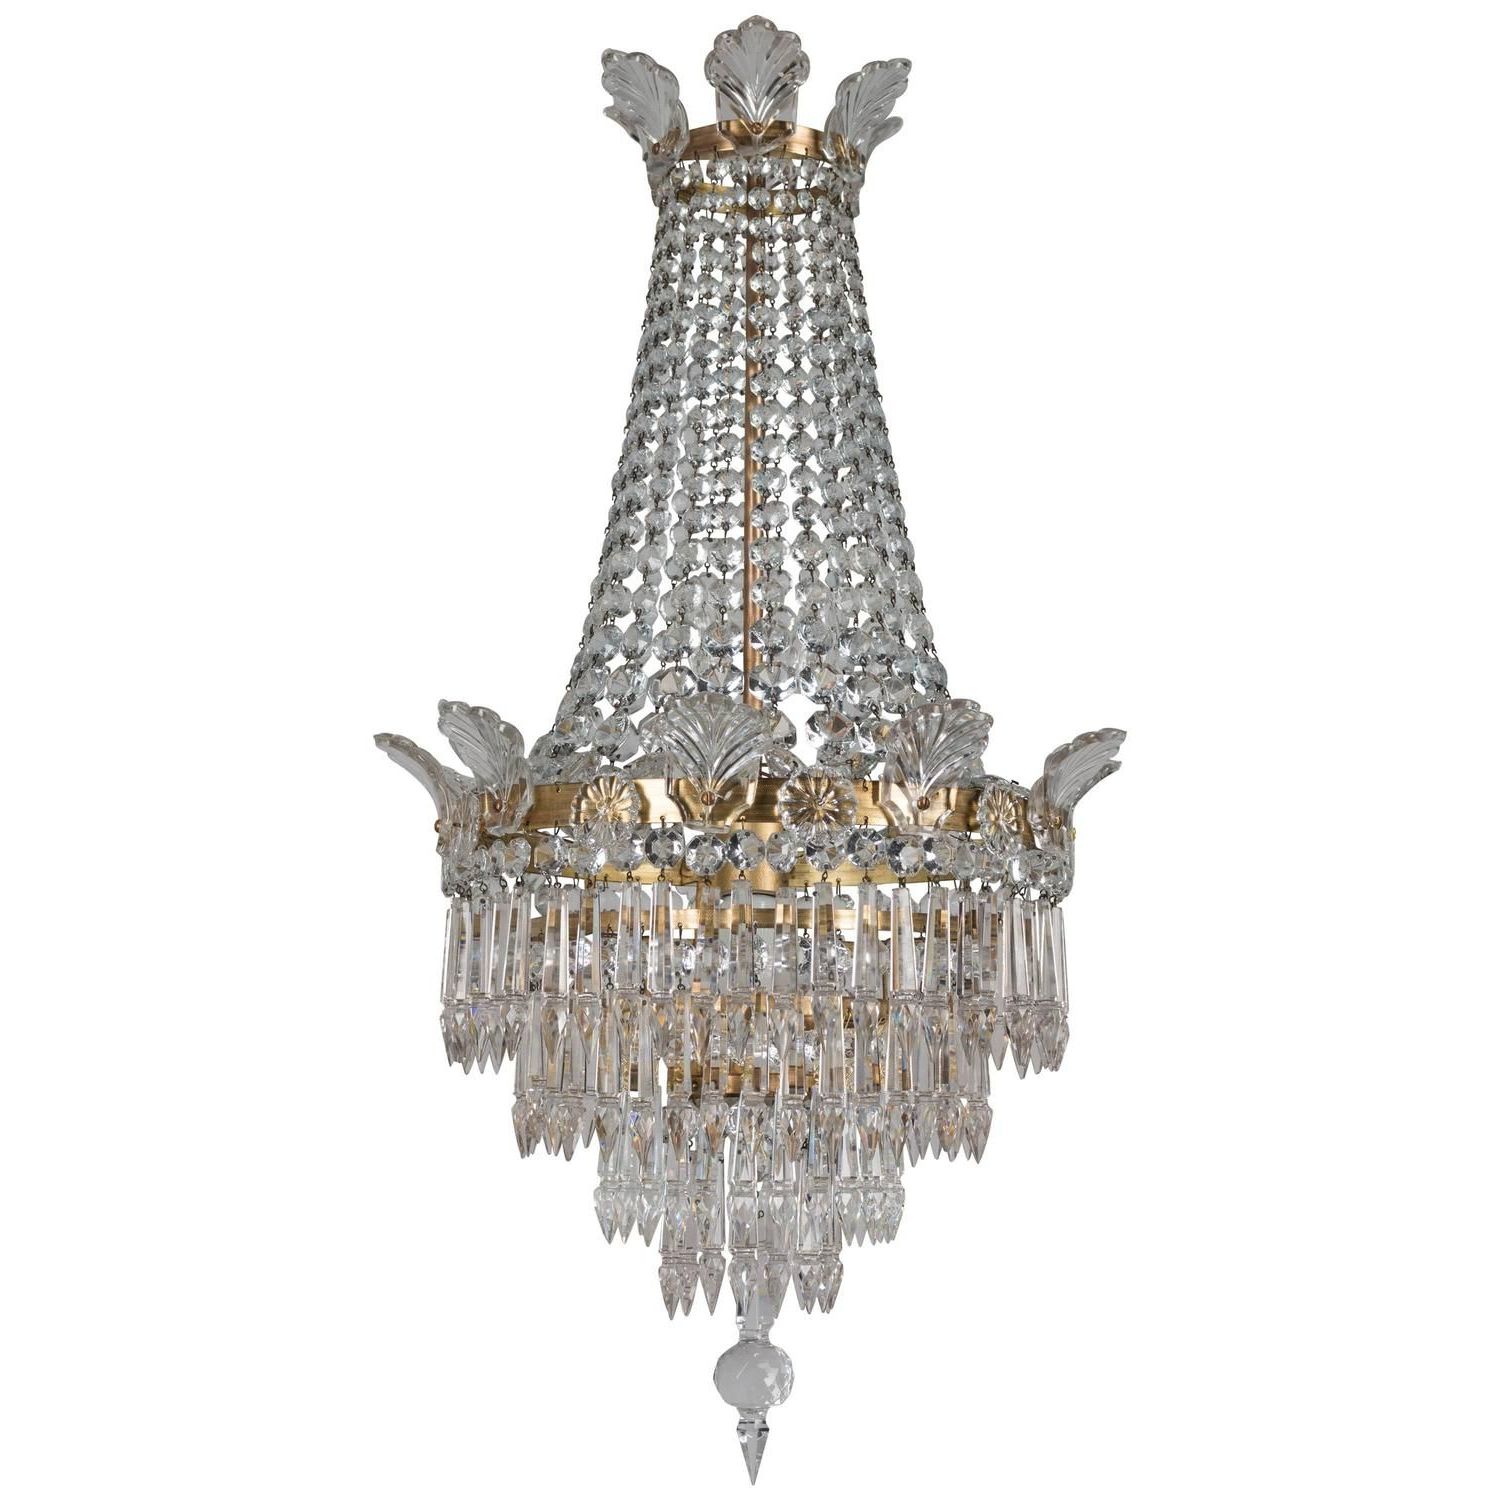 Roman Bronze And Crystal Chandeliers Intended For Well Liked French Empire Style Crystal Chandelier (View 1 of 15)